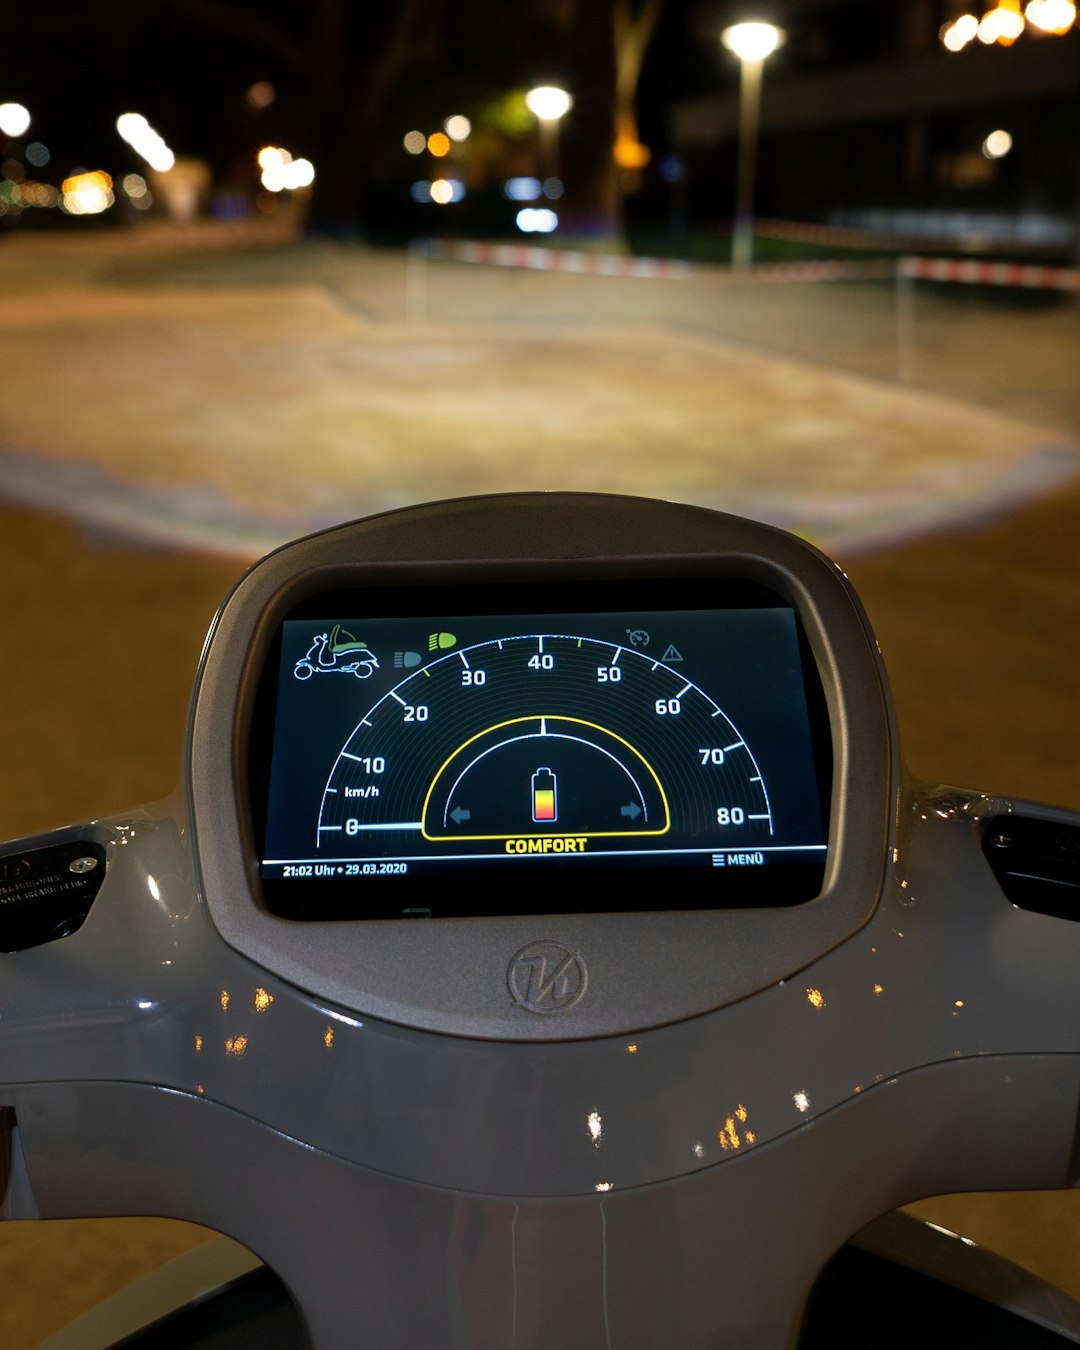 The electric scooter Kumpan 54 with a big, 7-inch LCD status screen. It's not only showing your speed, but also is the command center. Open the battery and storage bay, change acceleration settings, edit recuperation, use different driving modes....  